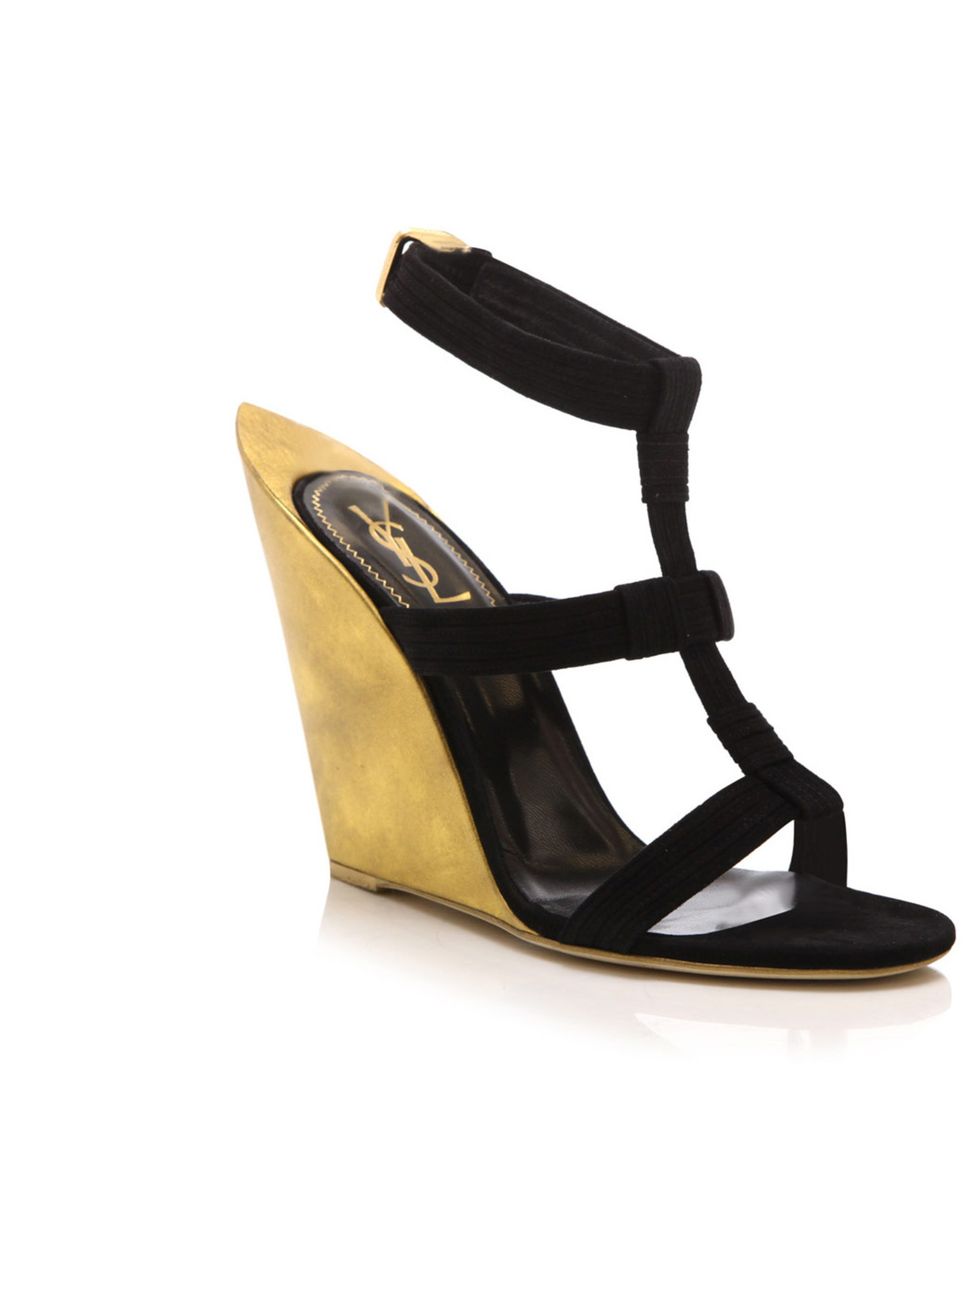 <p>Yves Saint Laurent 'Totem' wedges, £312 (was £780), at <a href="http://www.matchesfashion.com/product/111642">Matches Fashion</a></p>